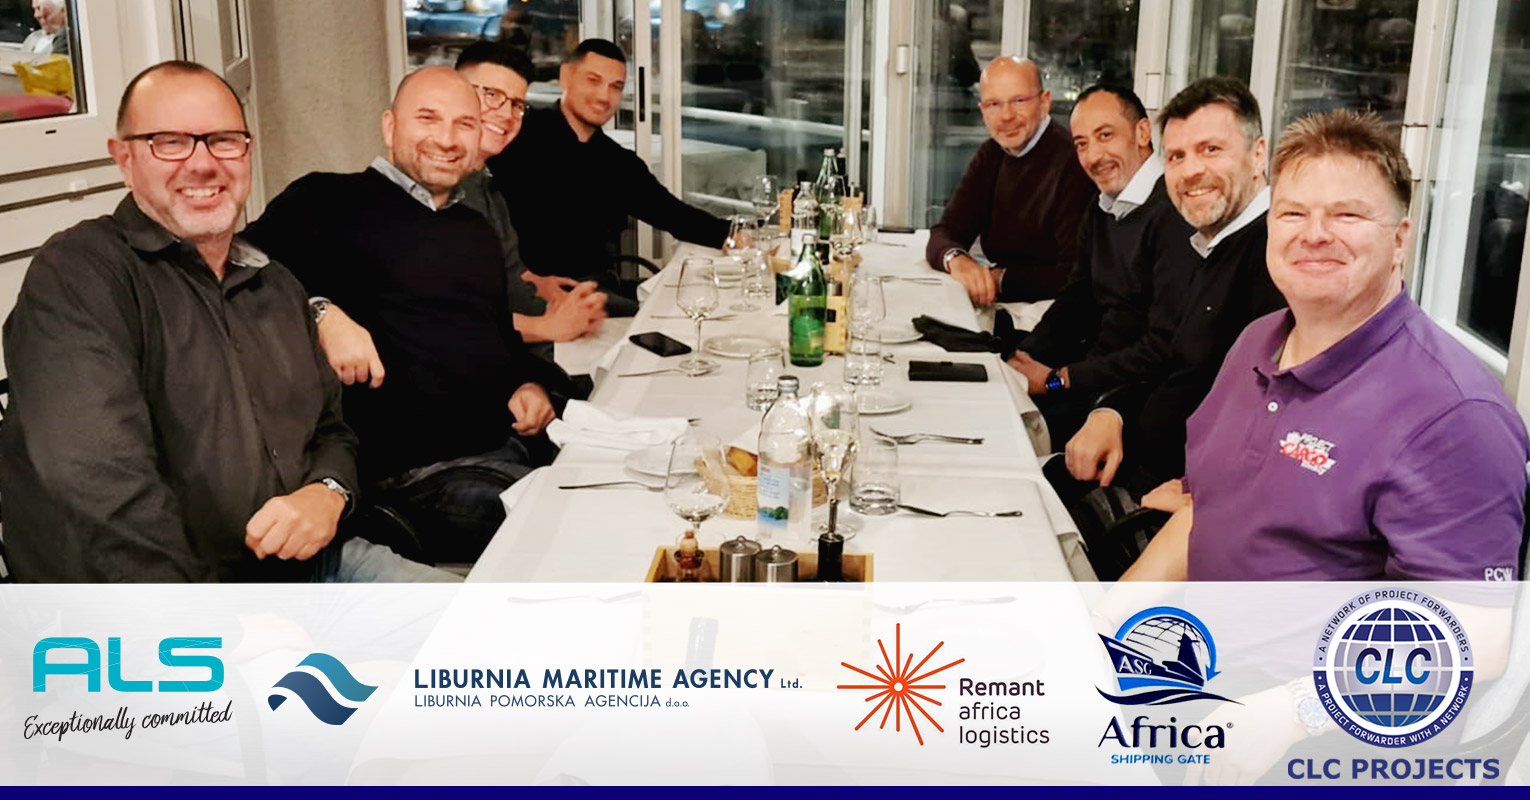 CLC Projects with Remnant Africa Logistics, Africa Shipping Gate, ALS Belgium and Liburnia Maritime Agency in Opatija, Croatia